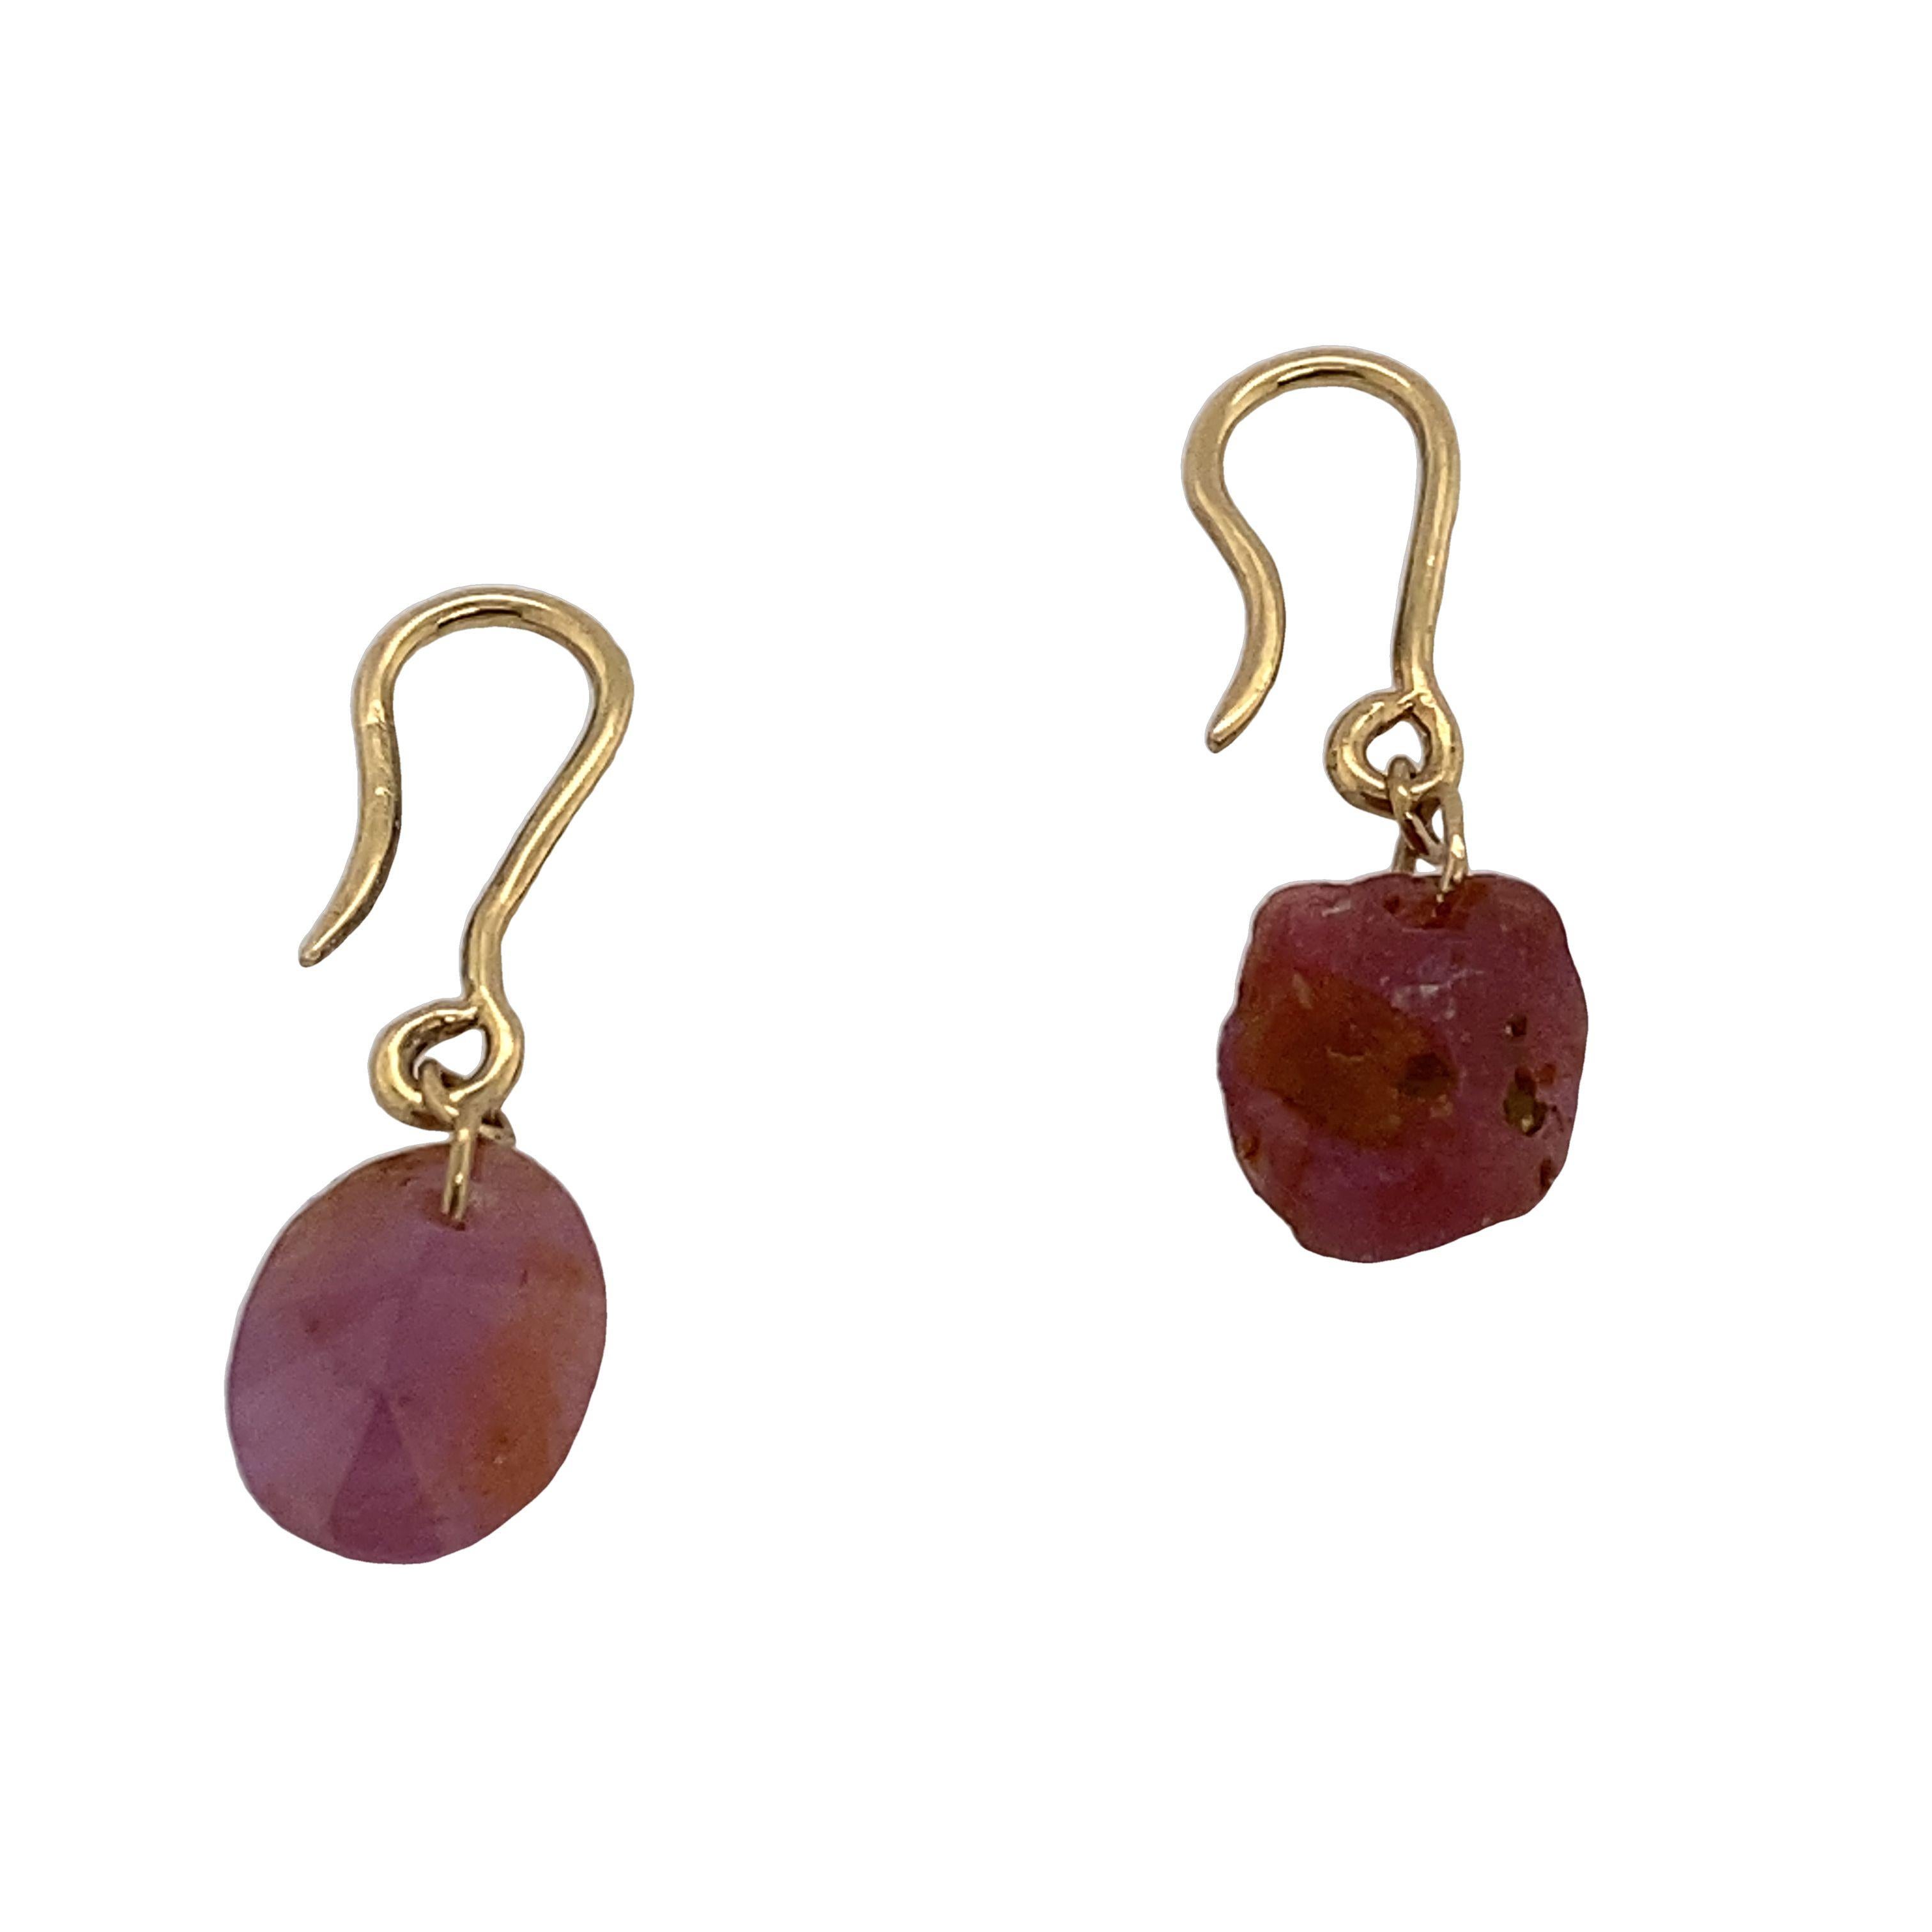 3.80ct Natural Ruby Earrings on Hook Fittings in 18ct Yellow Gold In Excellent Condition For Sale In London, GB